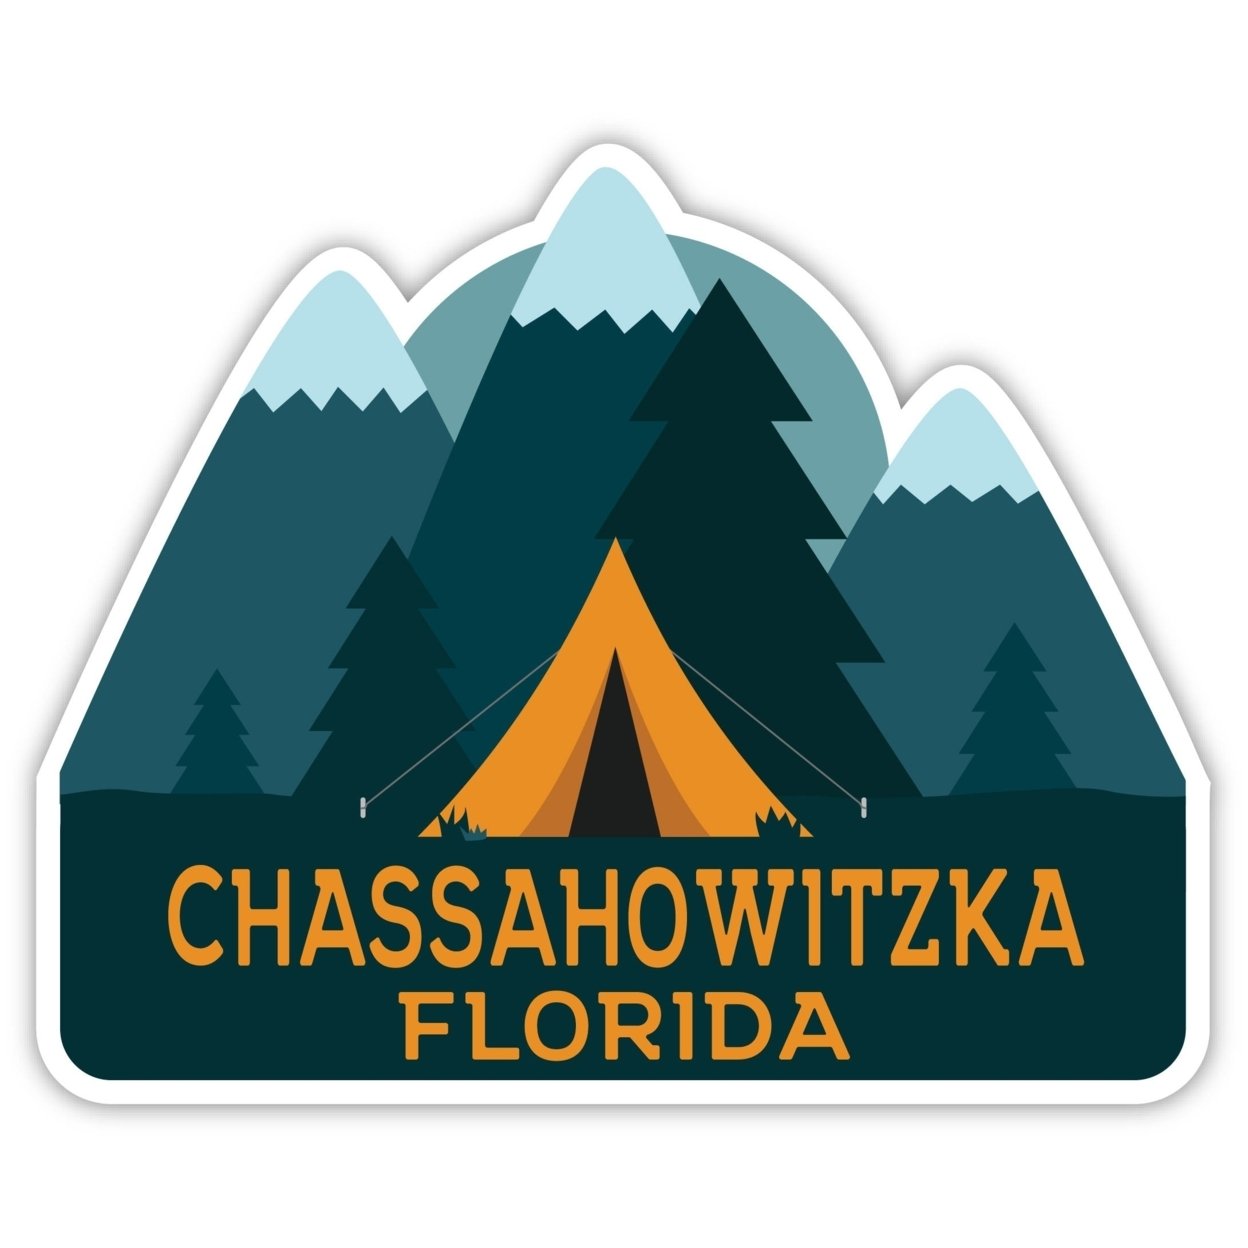 Chassahowitzka Florida Souvenir Decorative Stickers (Choose Theme And Size) - 4-Pack, 2-Inch, Tent